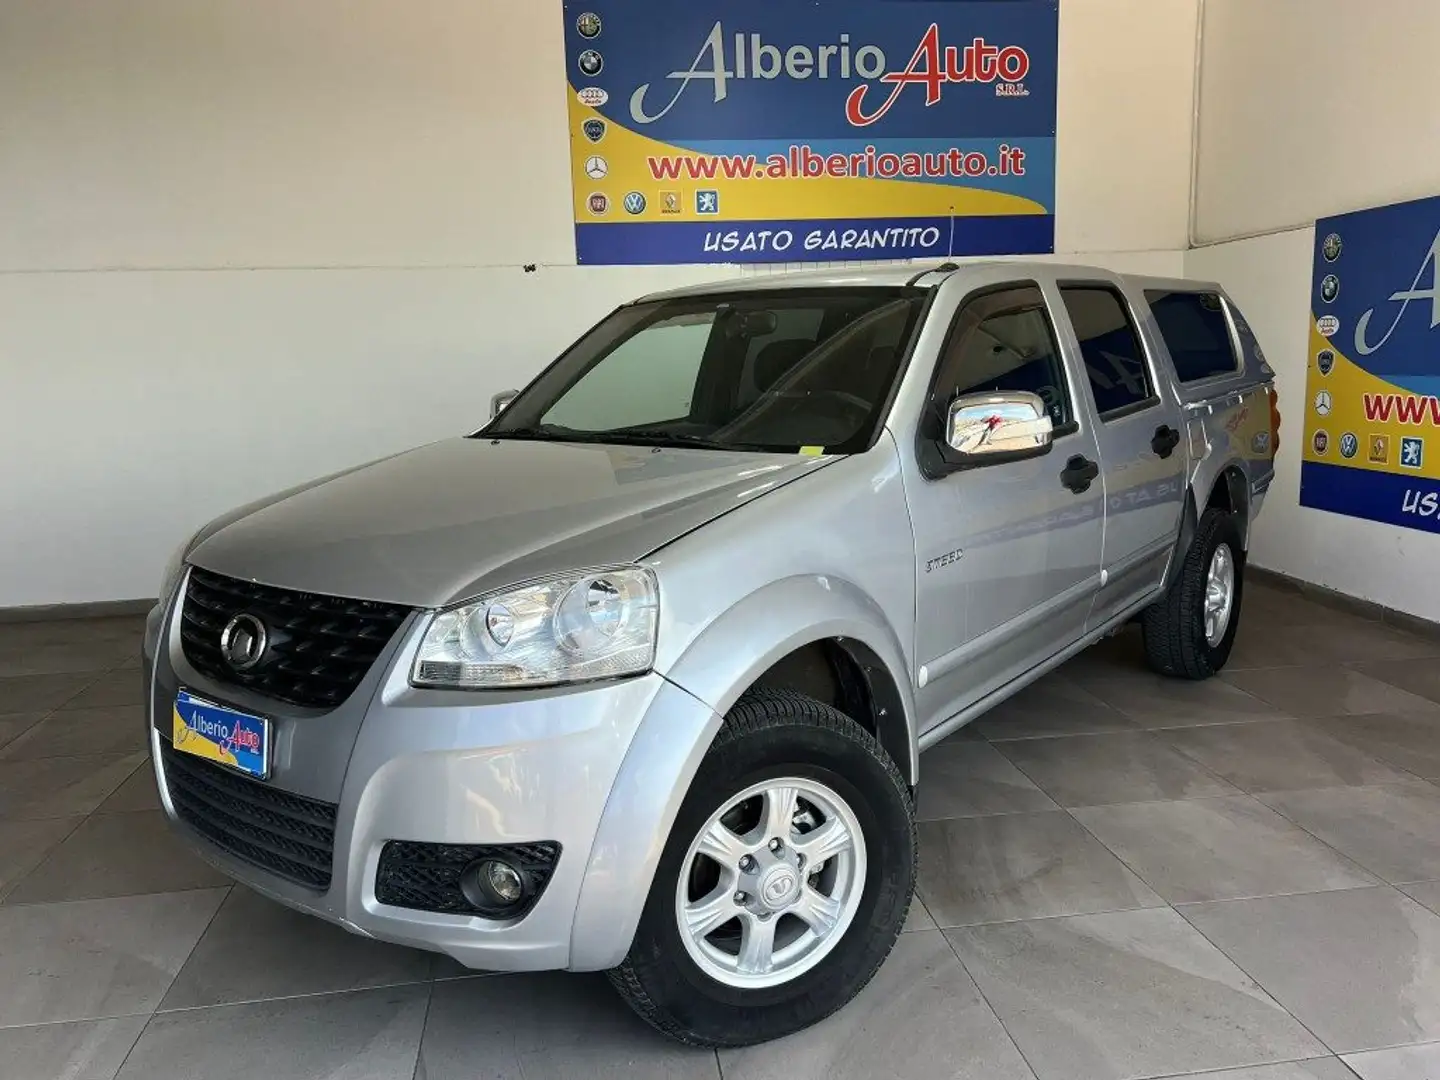 Great Wall Steed 5 DC 2.0 TDI 4x4 Argent - 1